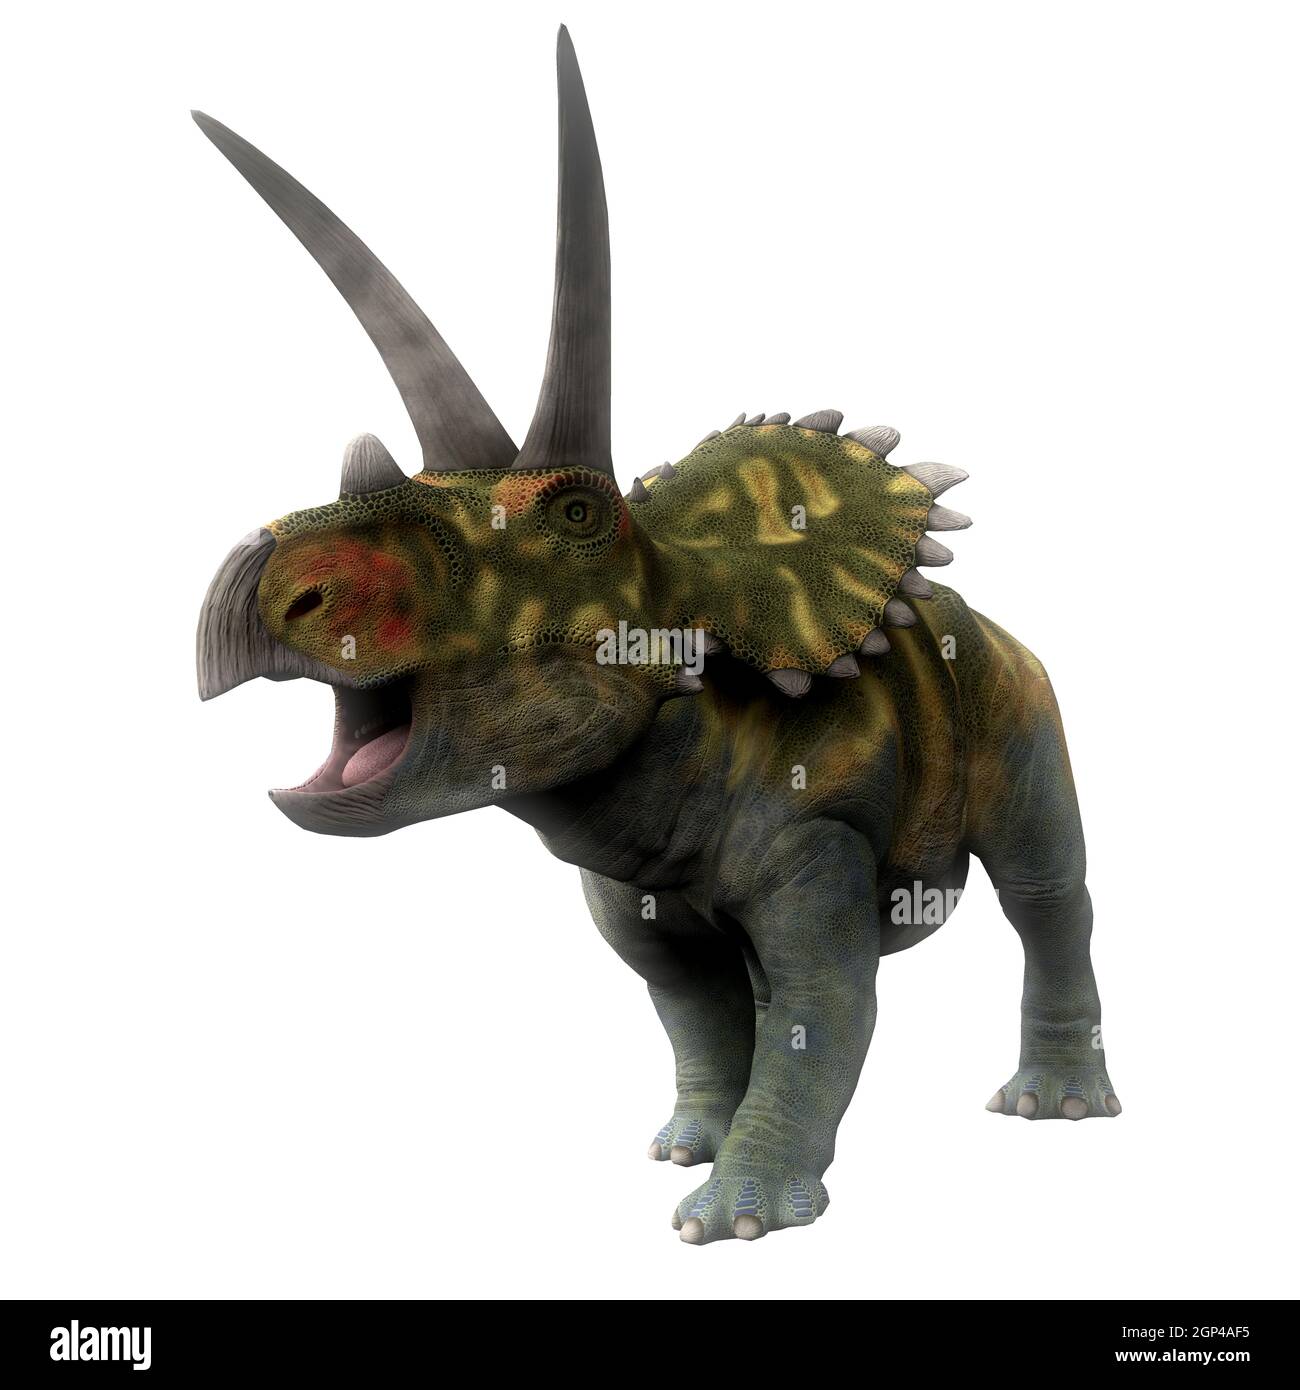 Coahuilaceratops was a ceratopsian herbivorous dinosaur that lived in the Cretaceous Period of Mexico. Stock Photo